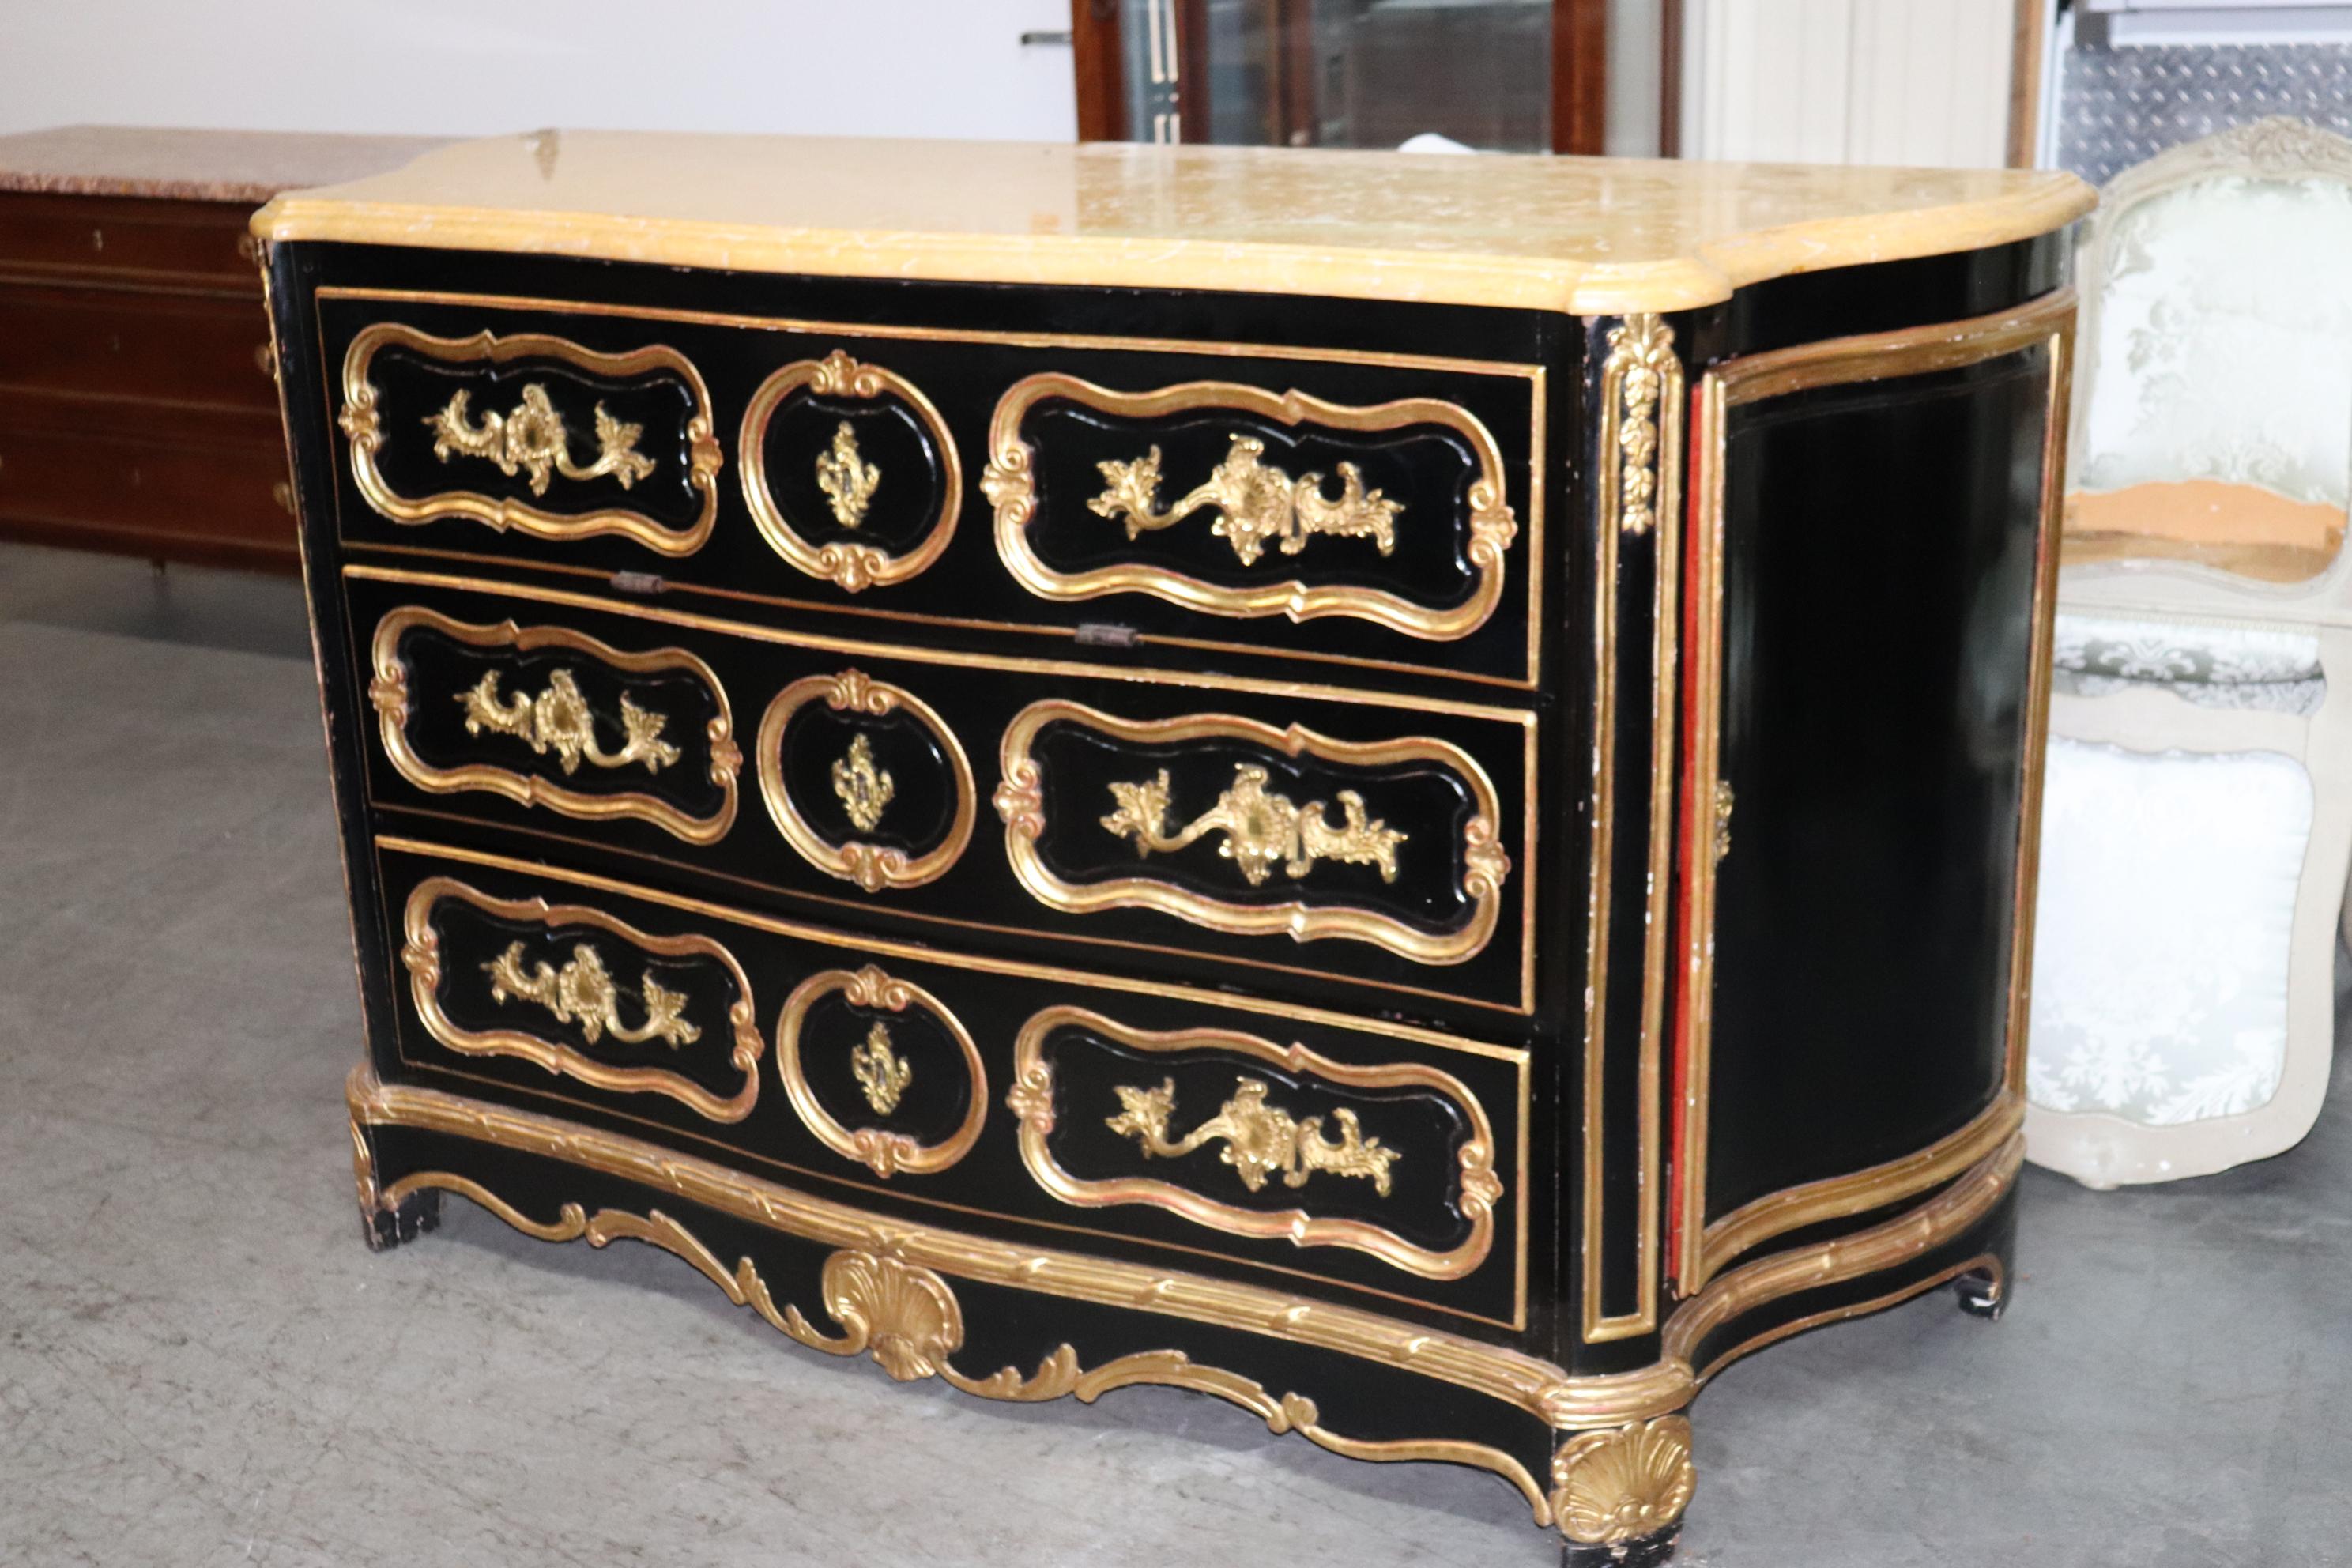 Huge Gilded Ebonized Period French Louis XV Marble Top Butlers Desk Commode For Sale 1